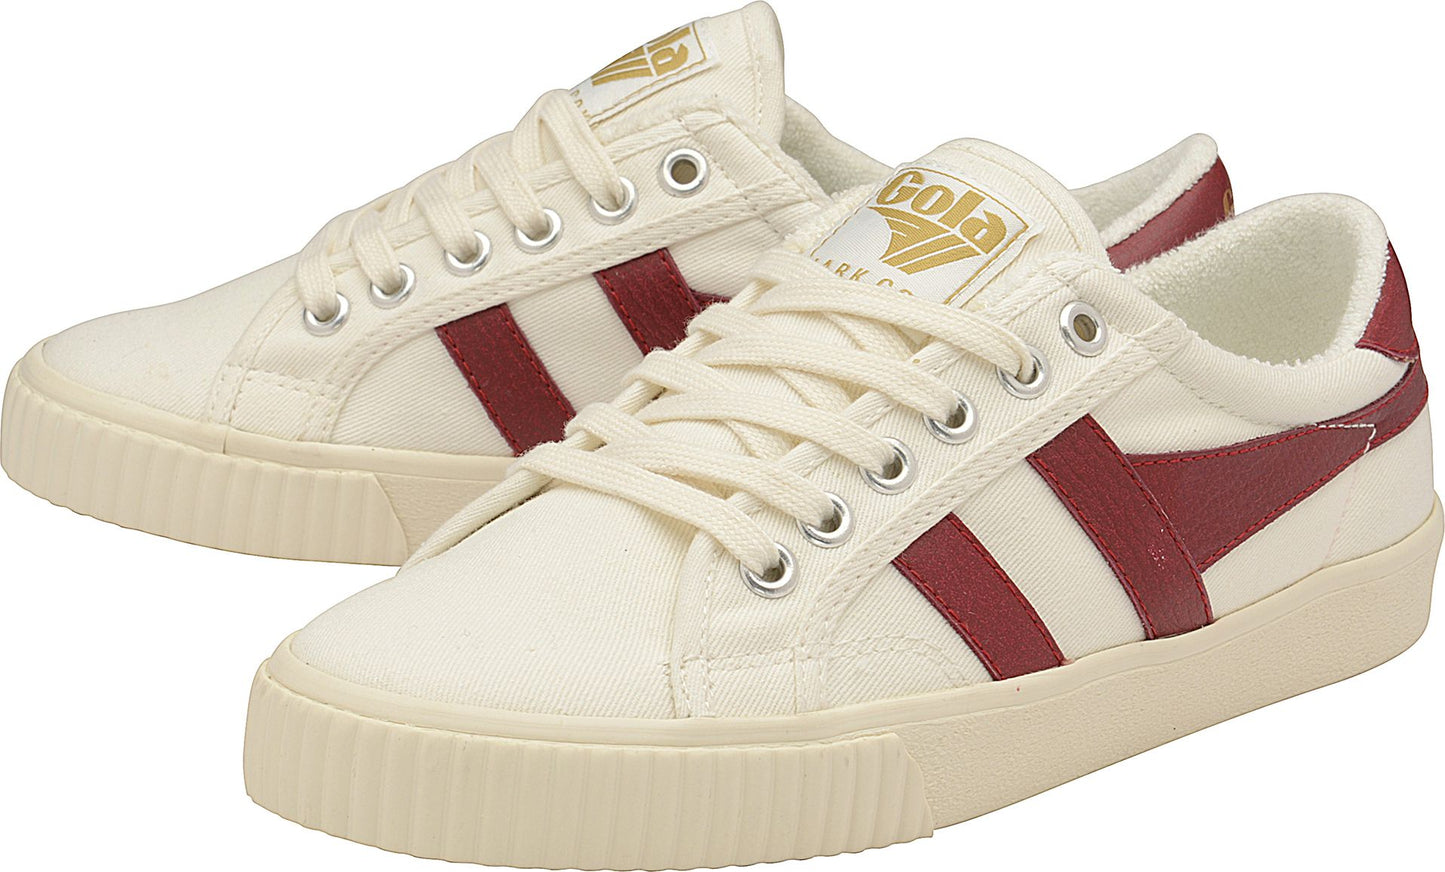 Gola Shoes Tennis Mark Cox Off White/deep Red